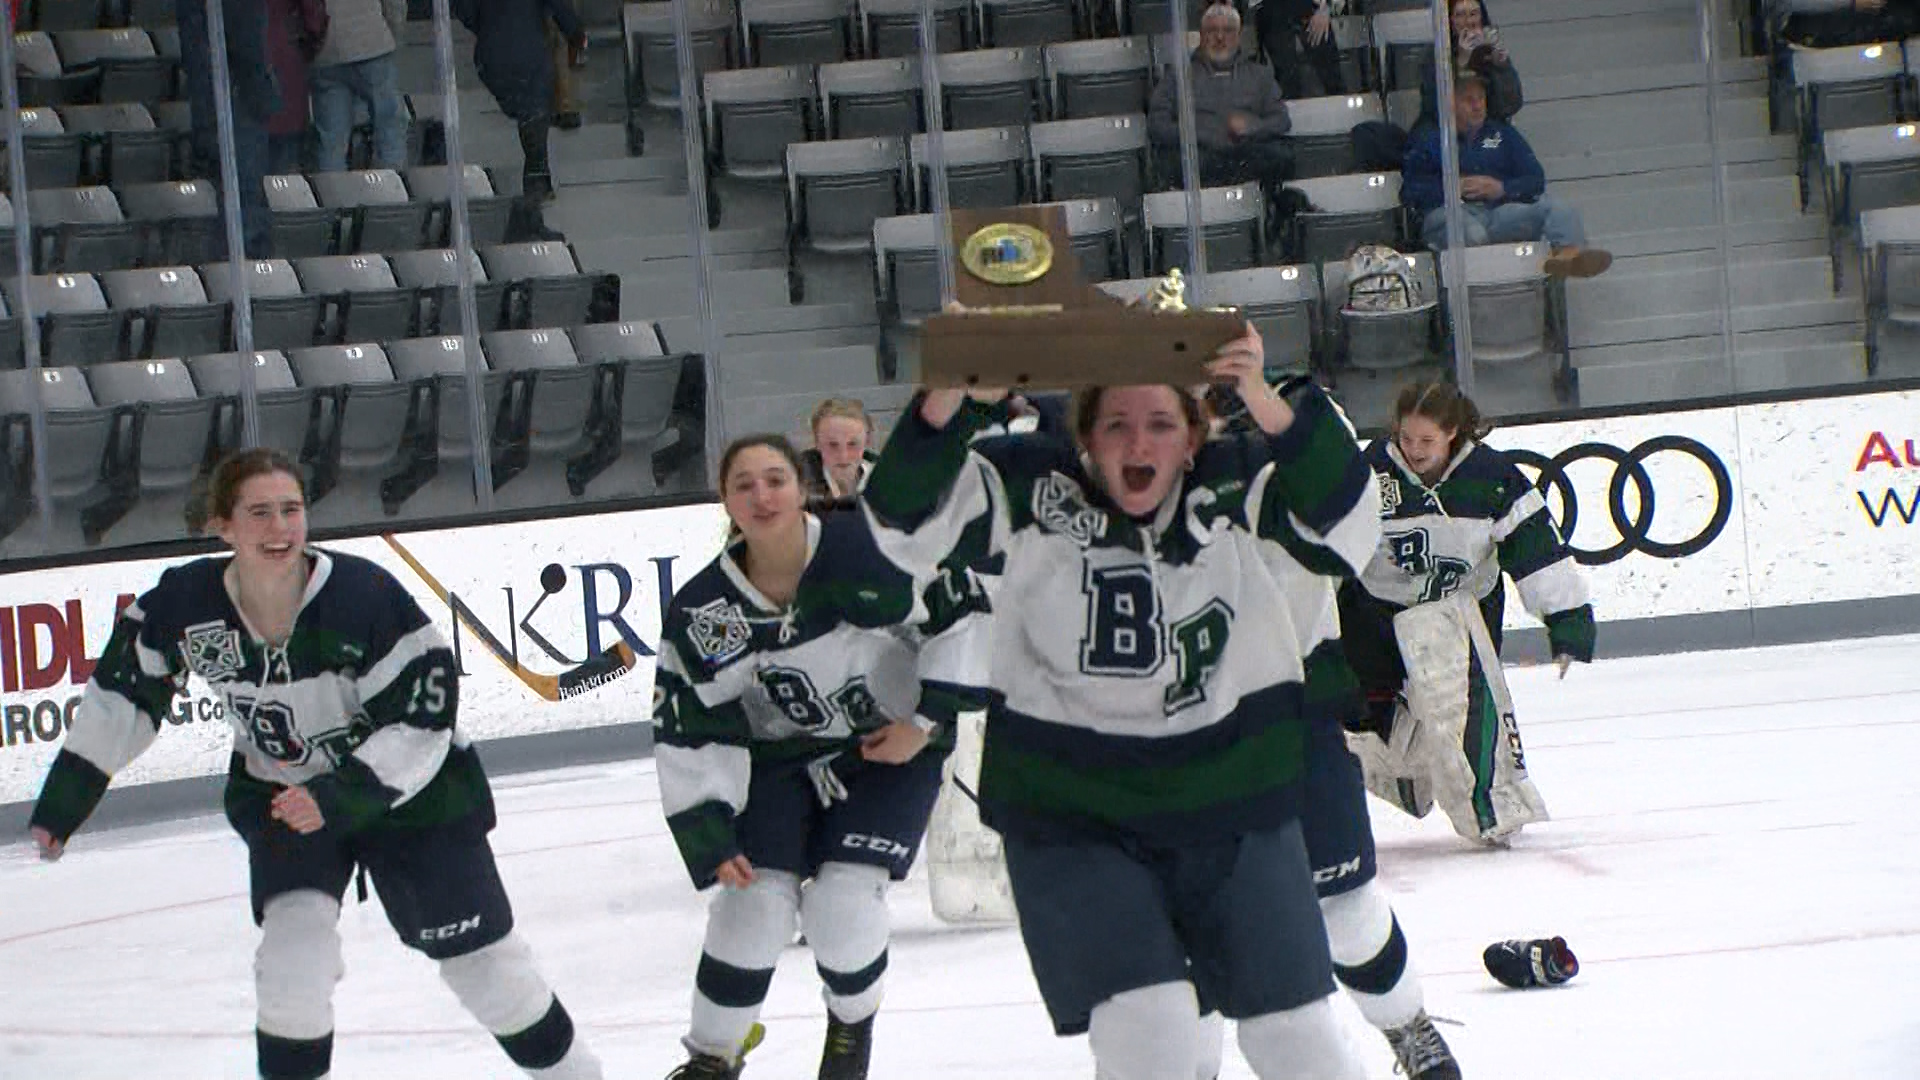 Burrillville/Ponaganset/Bay View Shocks La Salle, Completes Sweep For Division I Girls Hockey Crown | ABC6